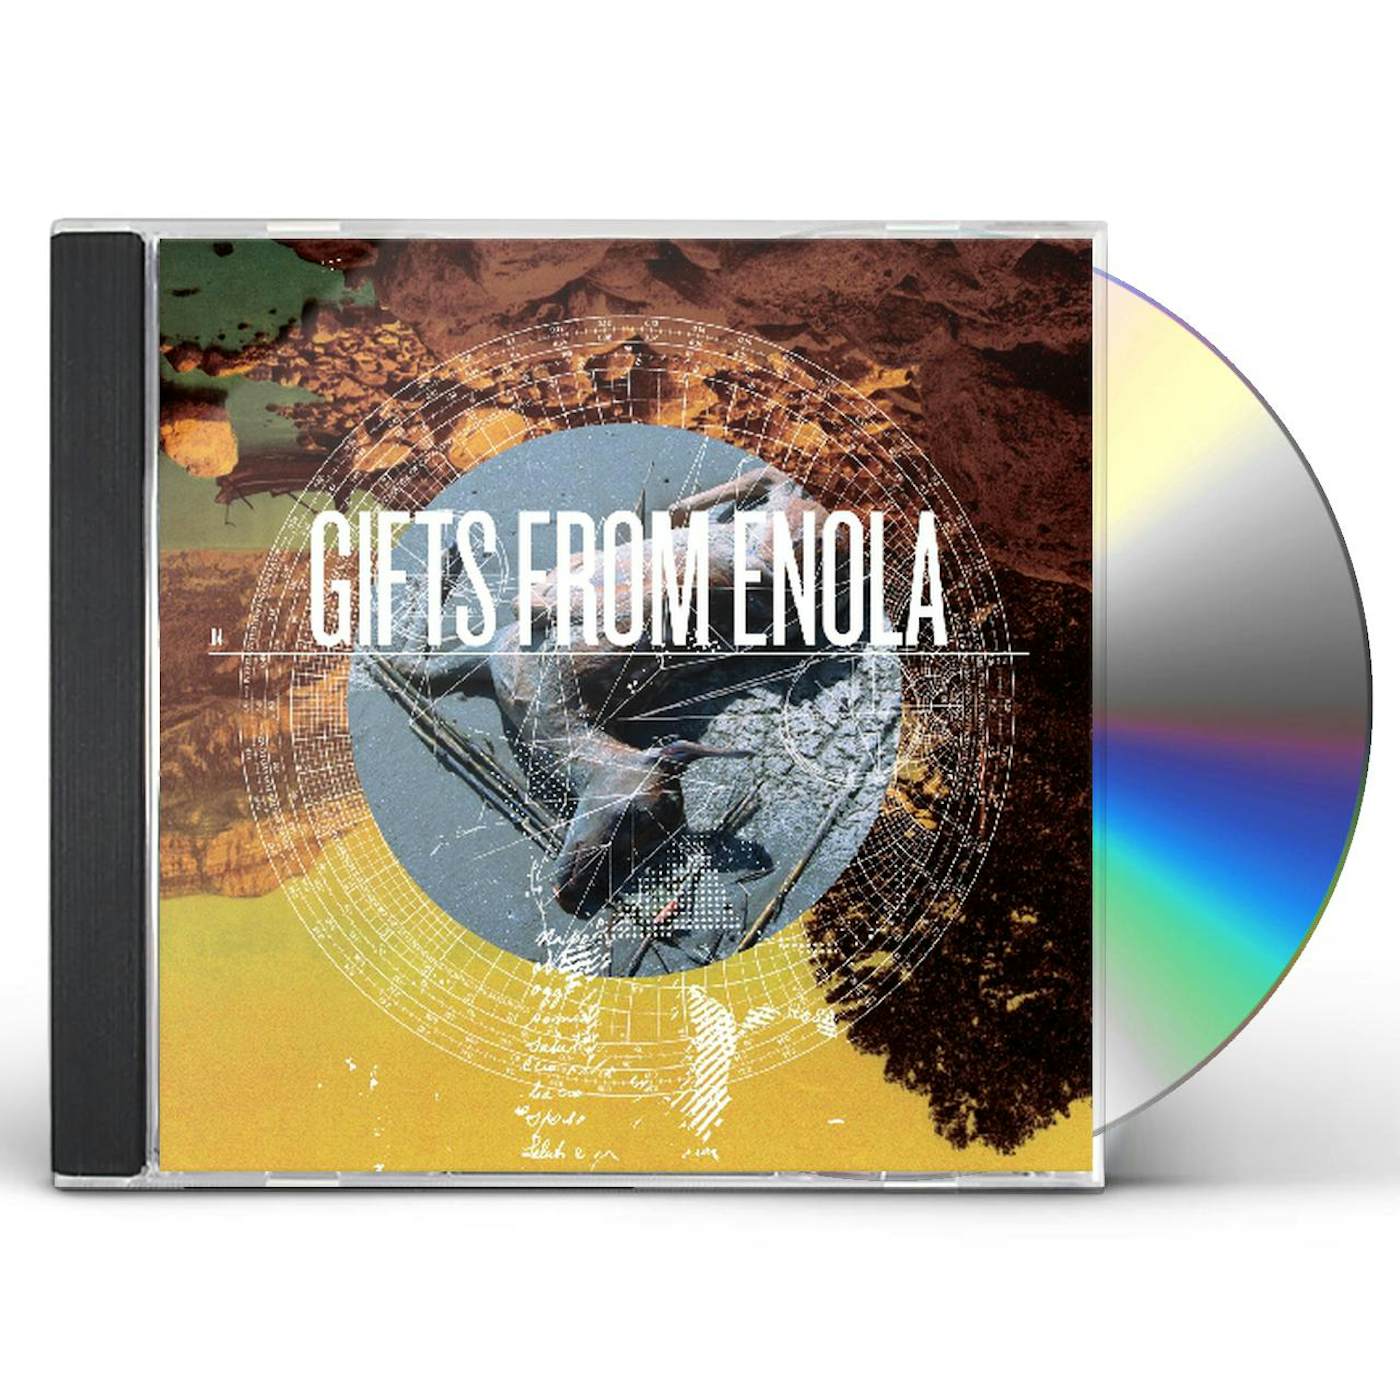 GIFTS FROM ENOLA CD